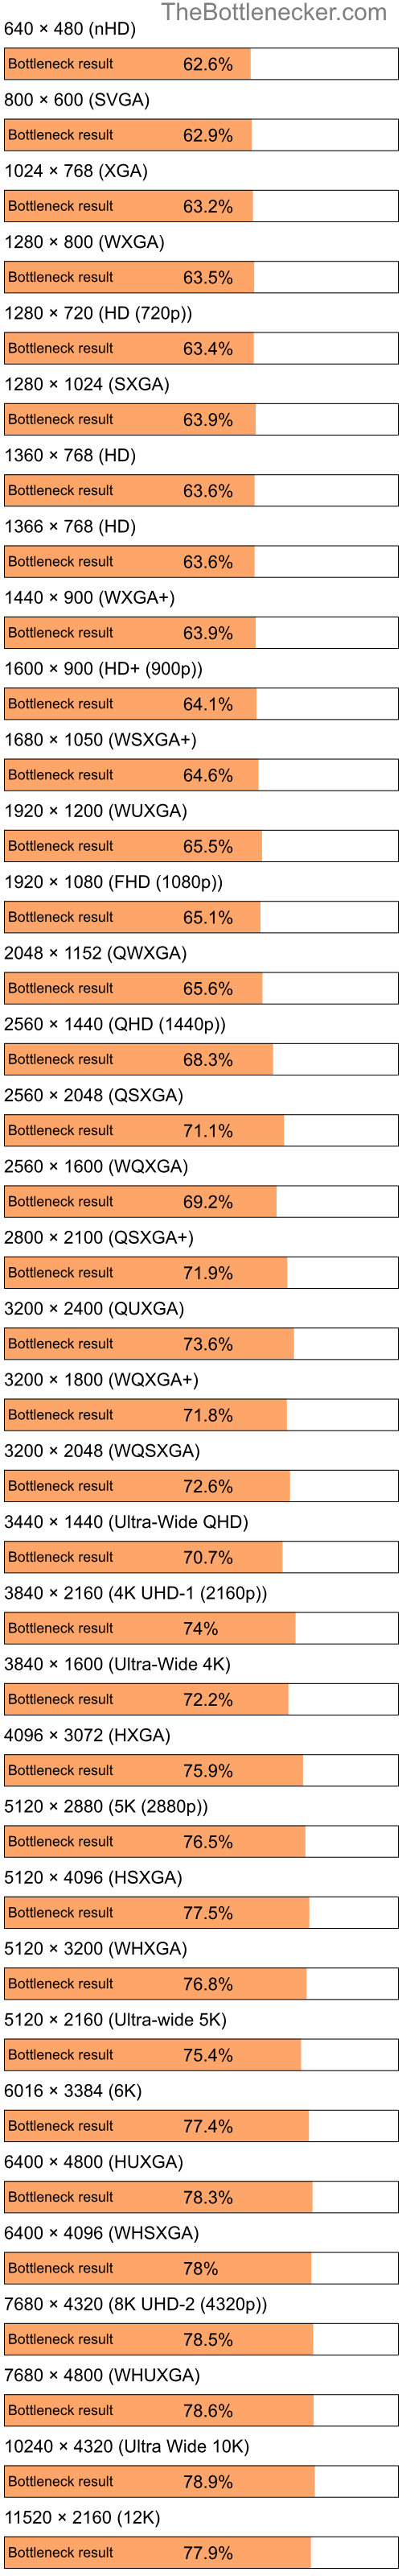 Bottleneck results by resolution for Intel Pentium 4 and NVIDIA GeForce Go 7400 in Processor Intense Tasks